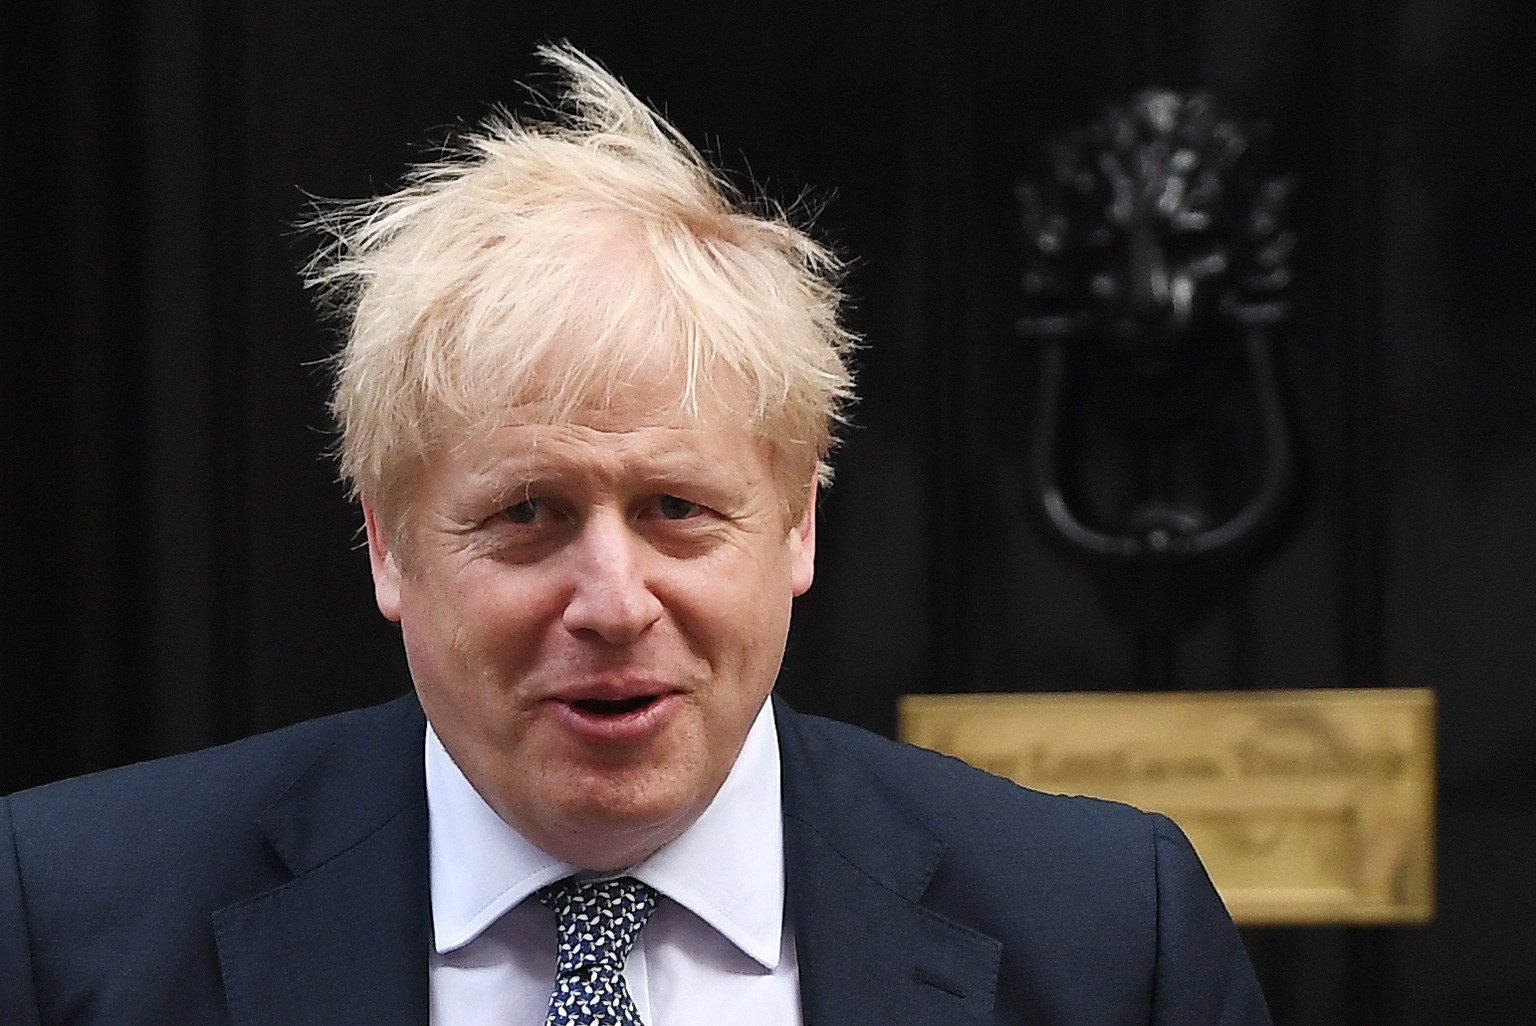 epa07962097 British Prime Minister Boris Johnson departs 10 Downing Street in London, Britain, 31 October 2019. Boris Johnson and Labour leader Jeremy Corbyn are set to unofficially kick off their gen ...